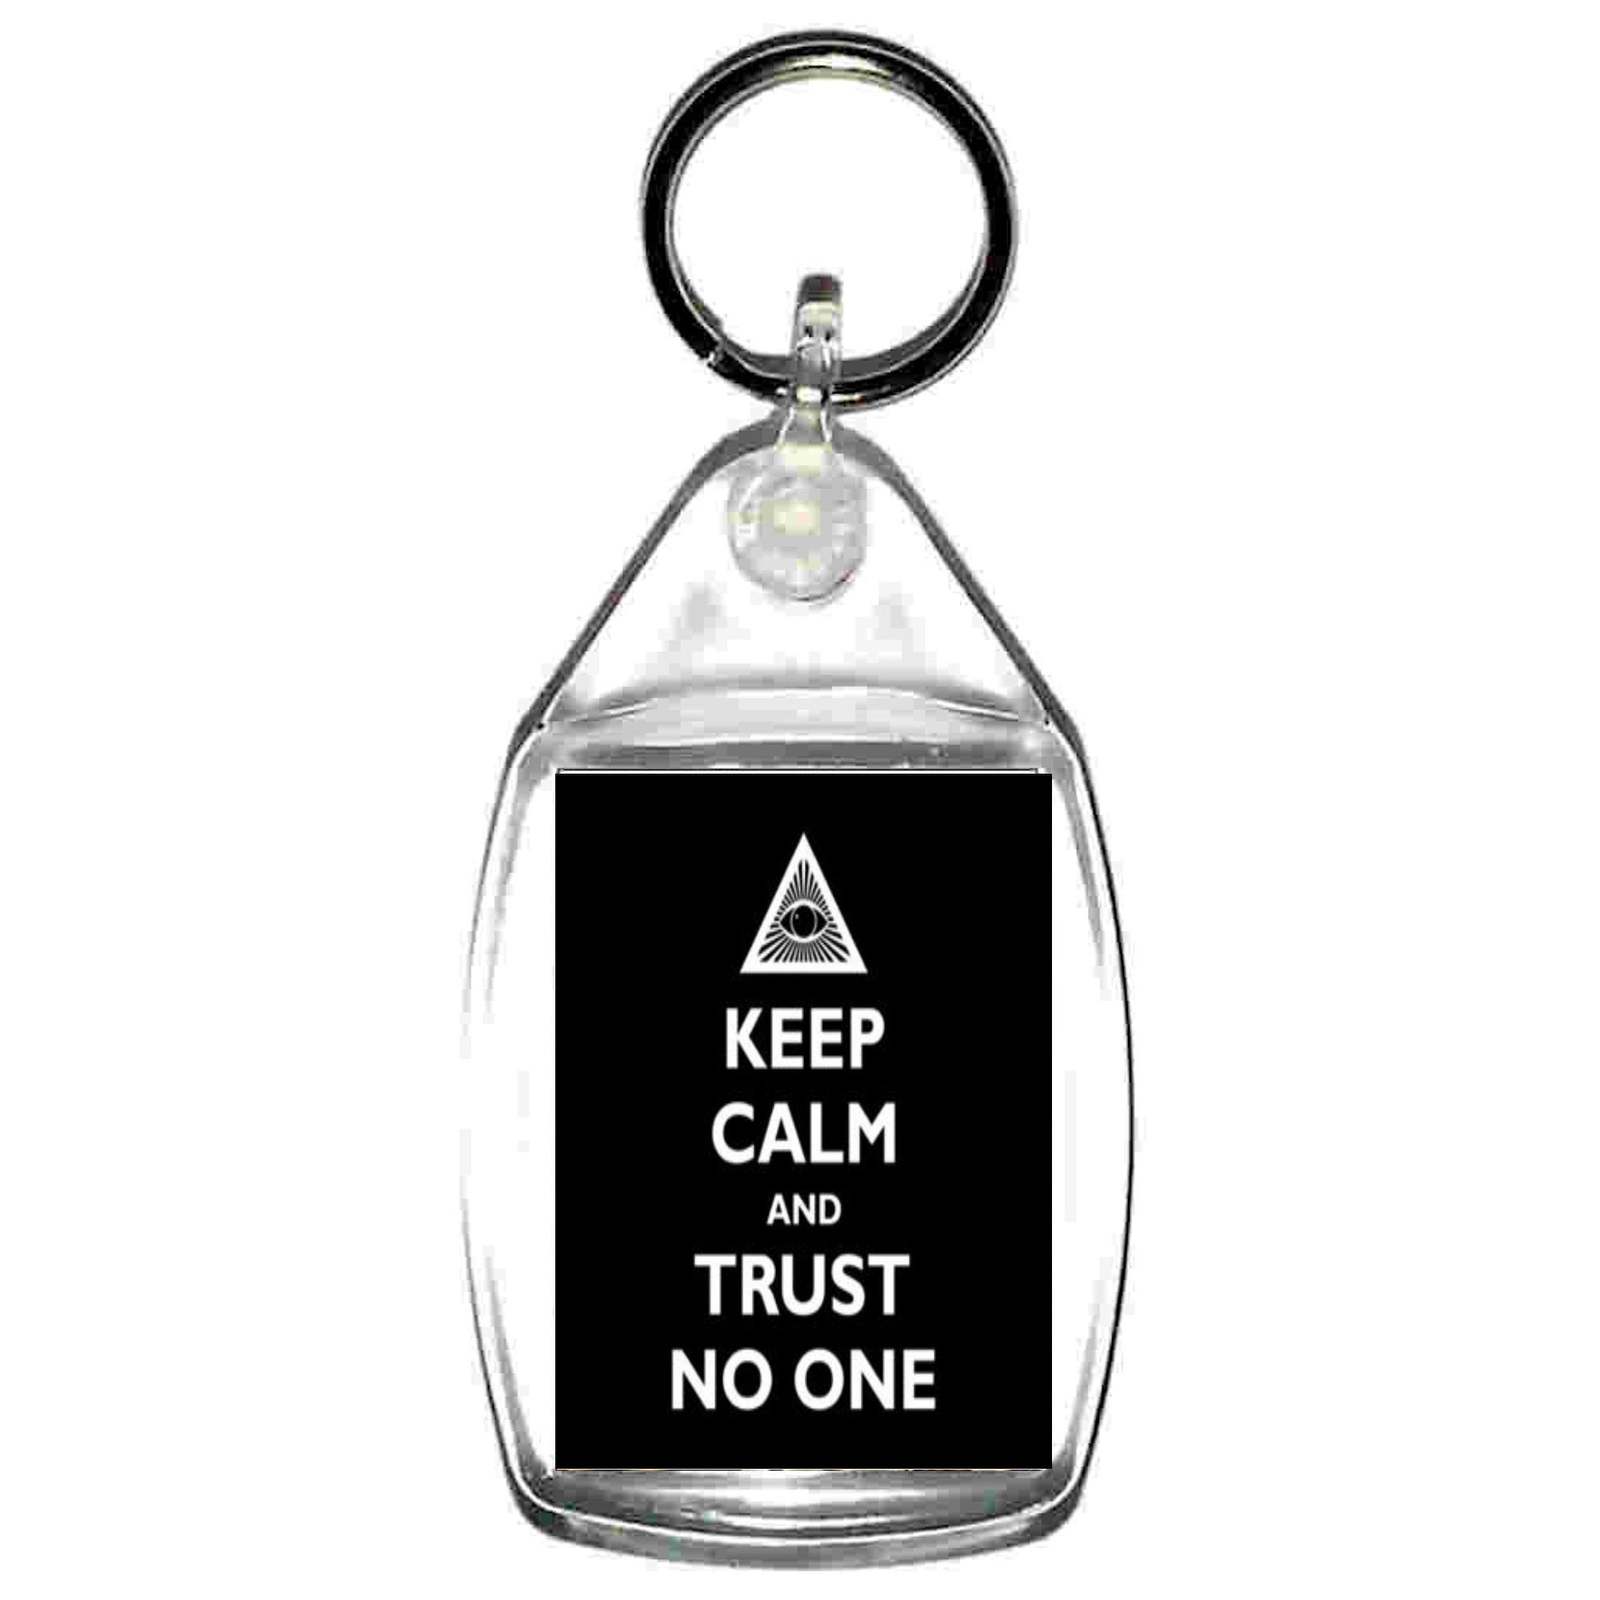 keep calm trust no one  keyring  handmade in uk from uk made parts, keyring, key